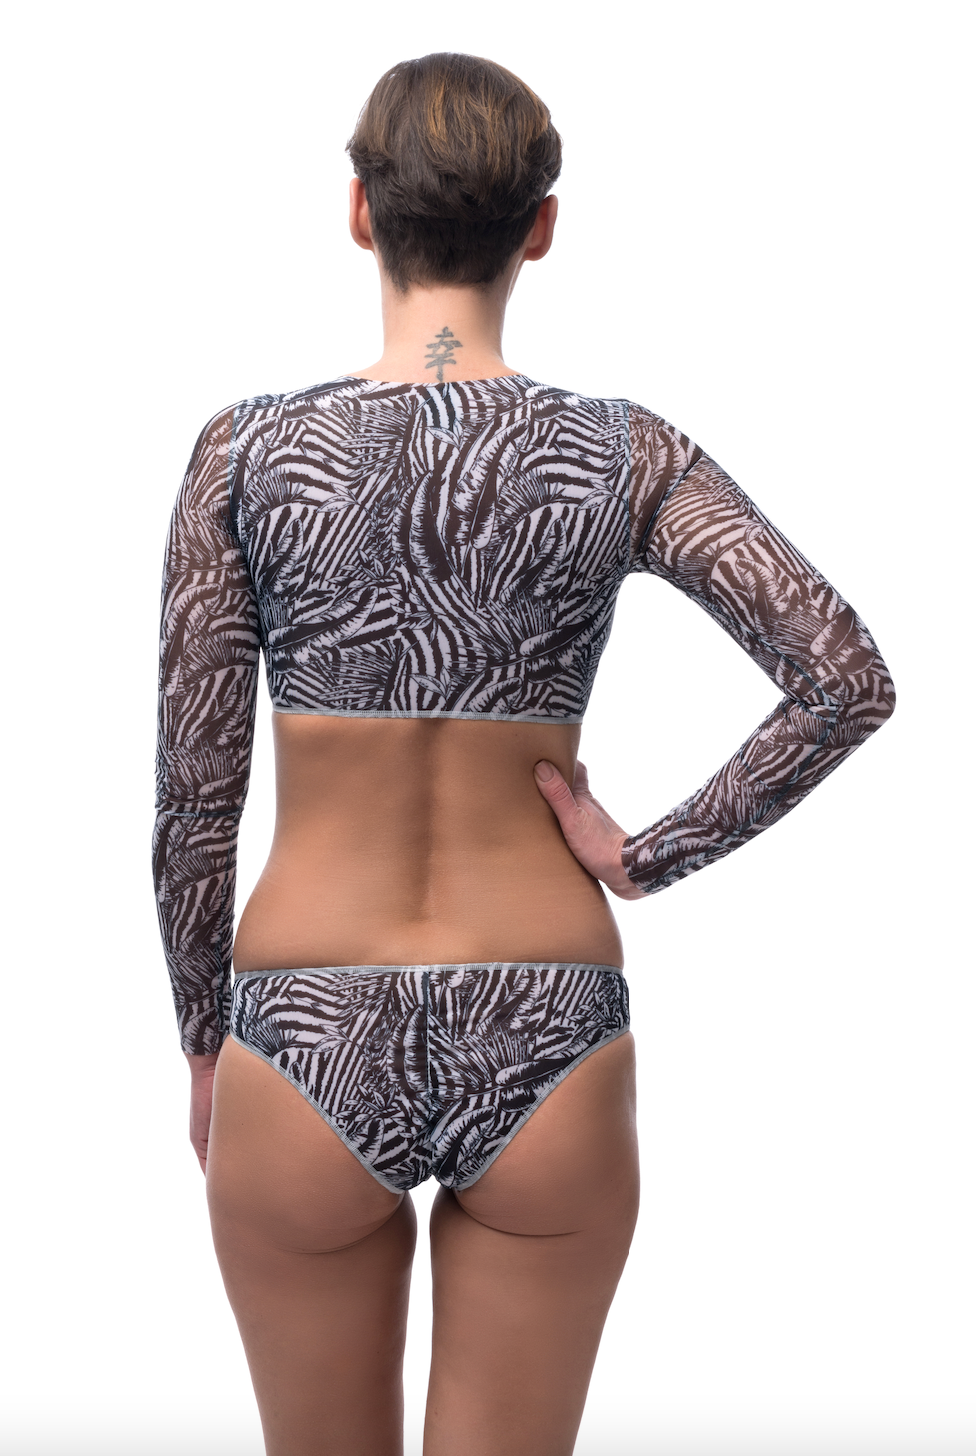 Explore sustainable tan-through smart swimsuits adorned with a trendy Fake Zebra print in this file. Included is a classic bikini offering SPF35 protection for sun-safe sophistication.